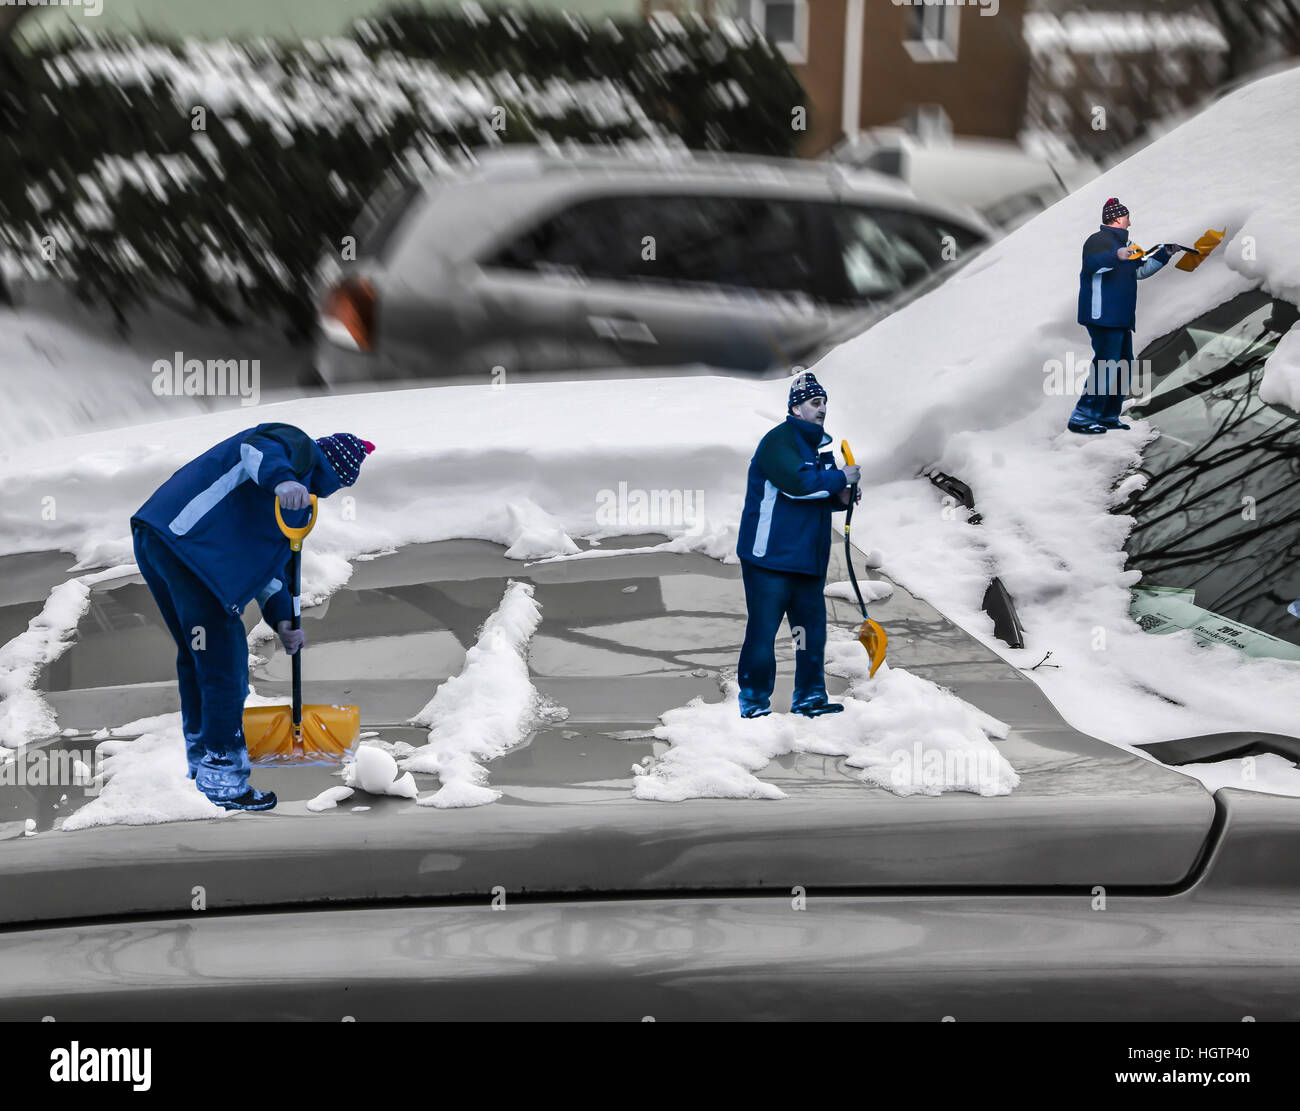 Man shoveling snow from car after snow storm, digitally altered. Stock Photo